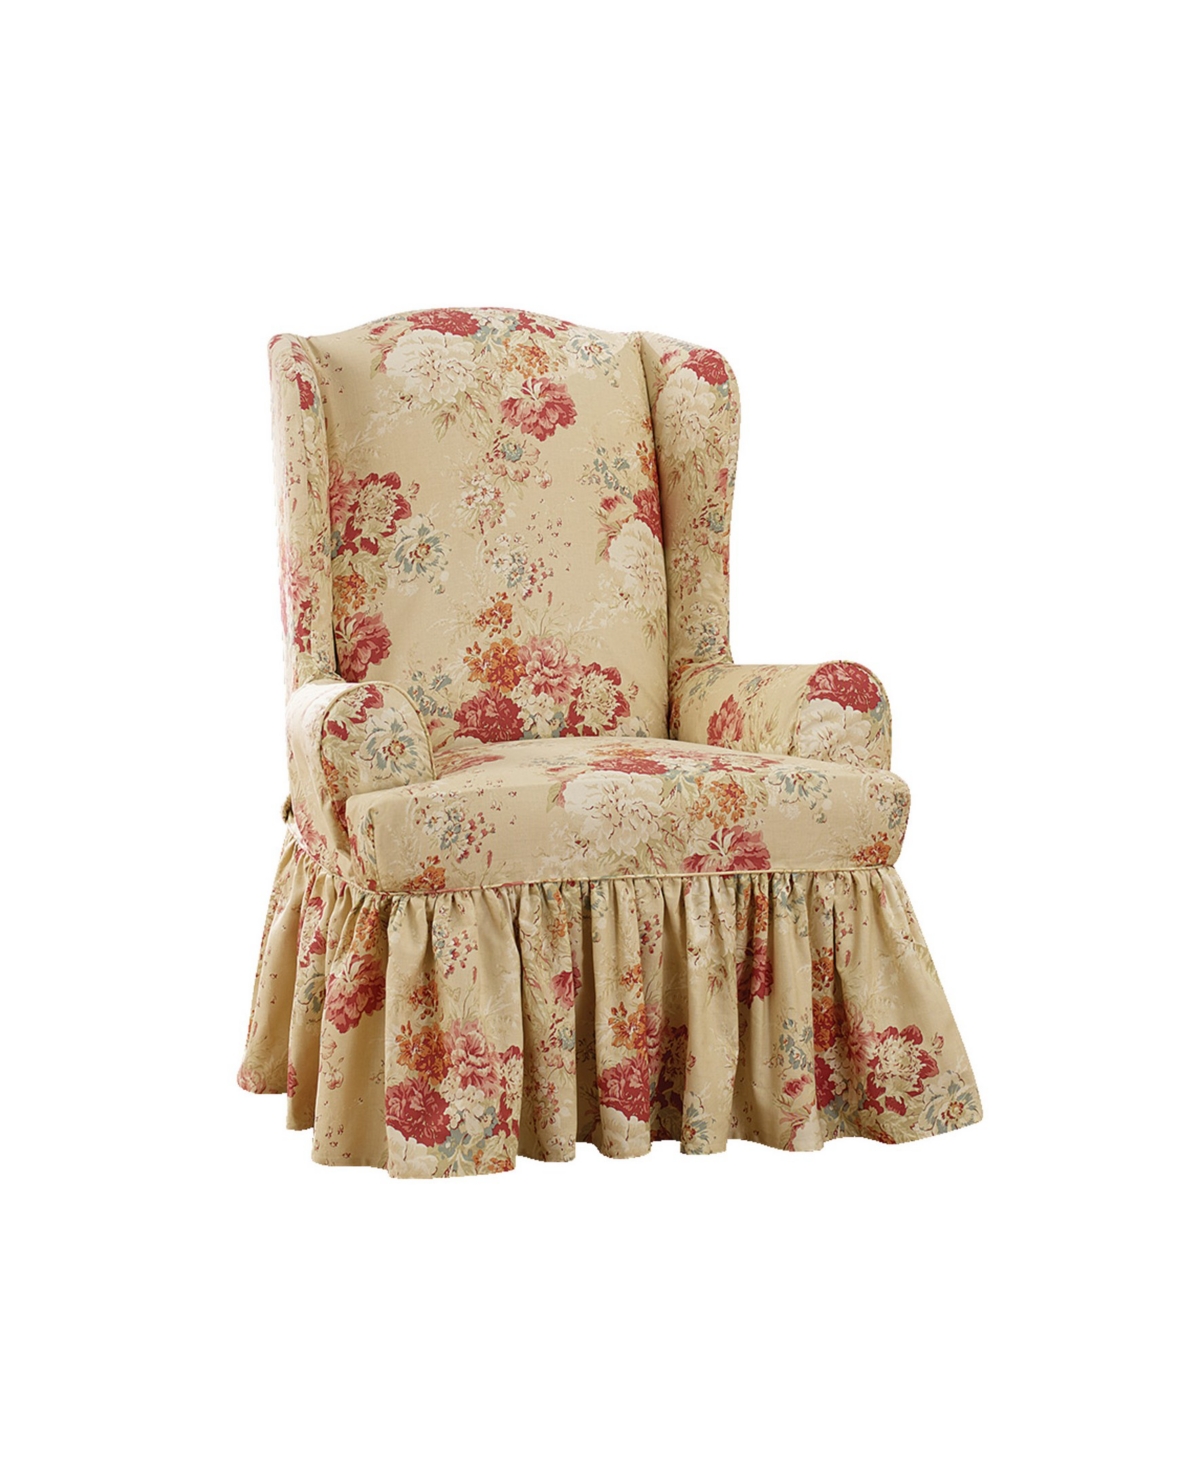 Waverly Ballad Bouquet Wing Chair Slipcover, 45" X 32" In Blush